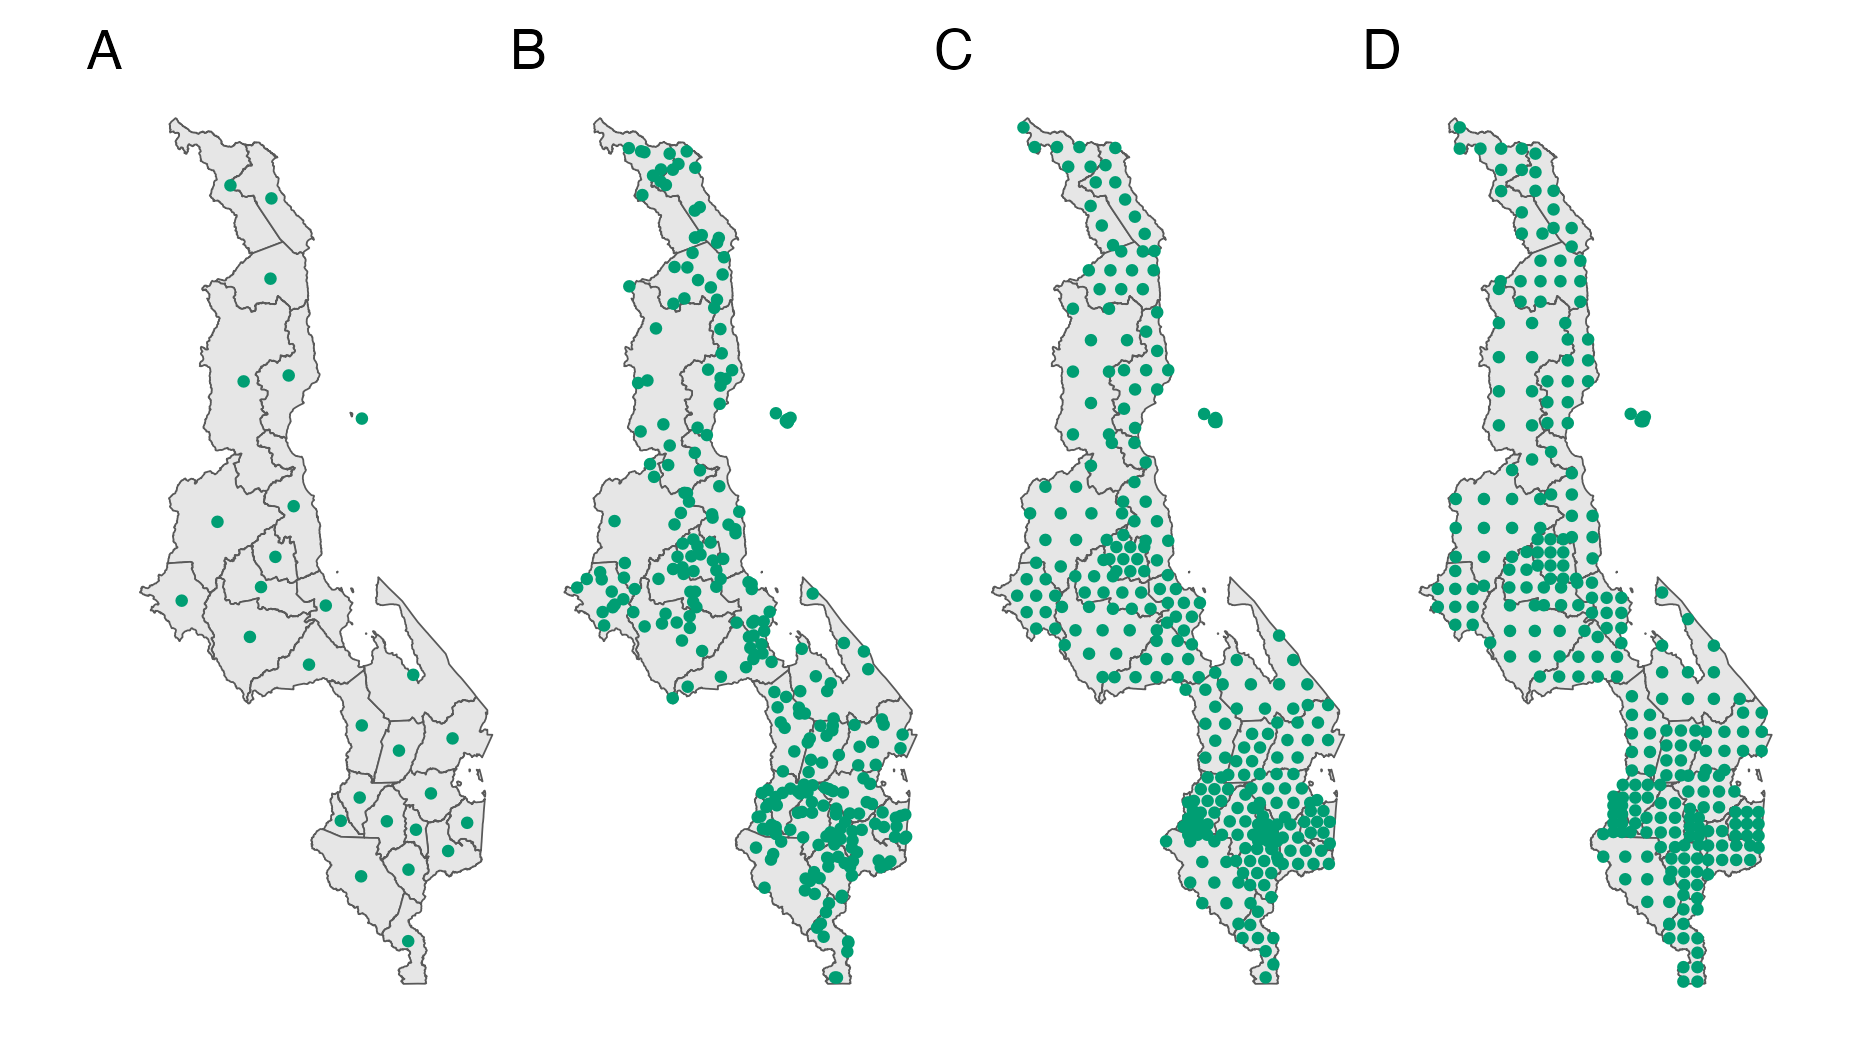 The \(n = 33\) districts of Malawi. Panel A shows the centroids as in Section 4.2.1. Panel B shows \(L_i = 10\) randomly chosen points, Panel C hexagonal points, and Panel D grid points in each area, each generated using the sf::st_sample function (E. Pebesma 2018).